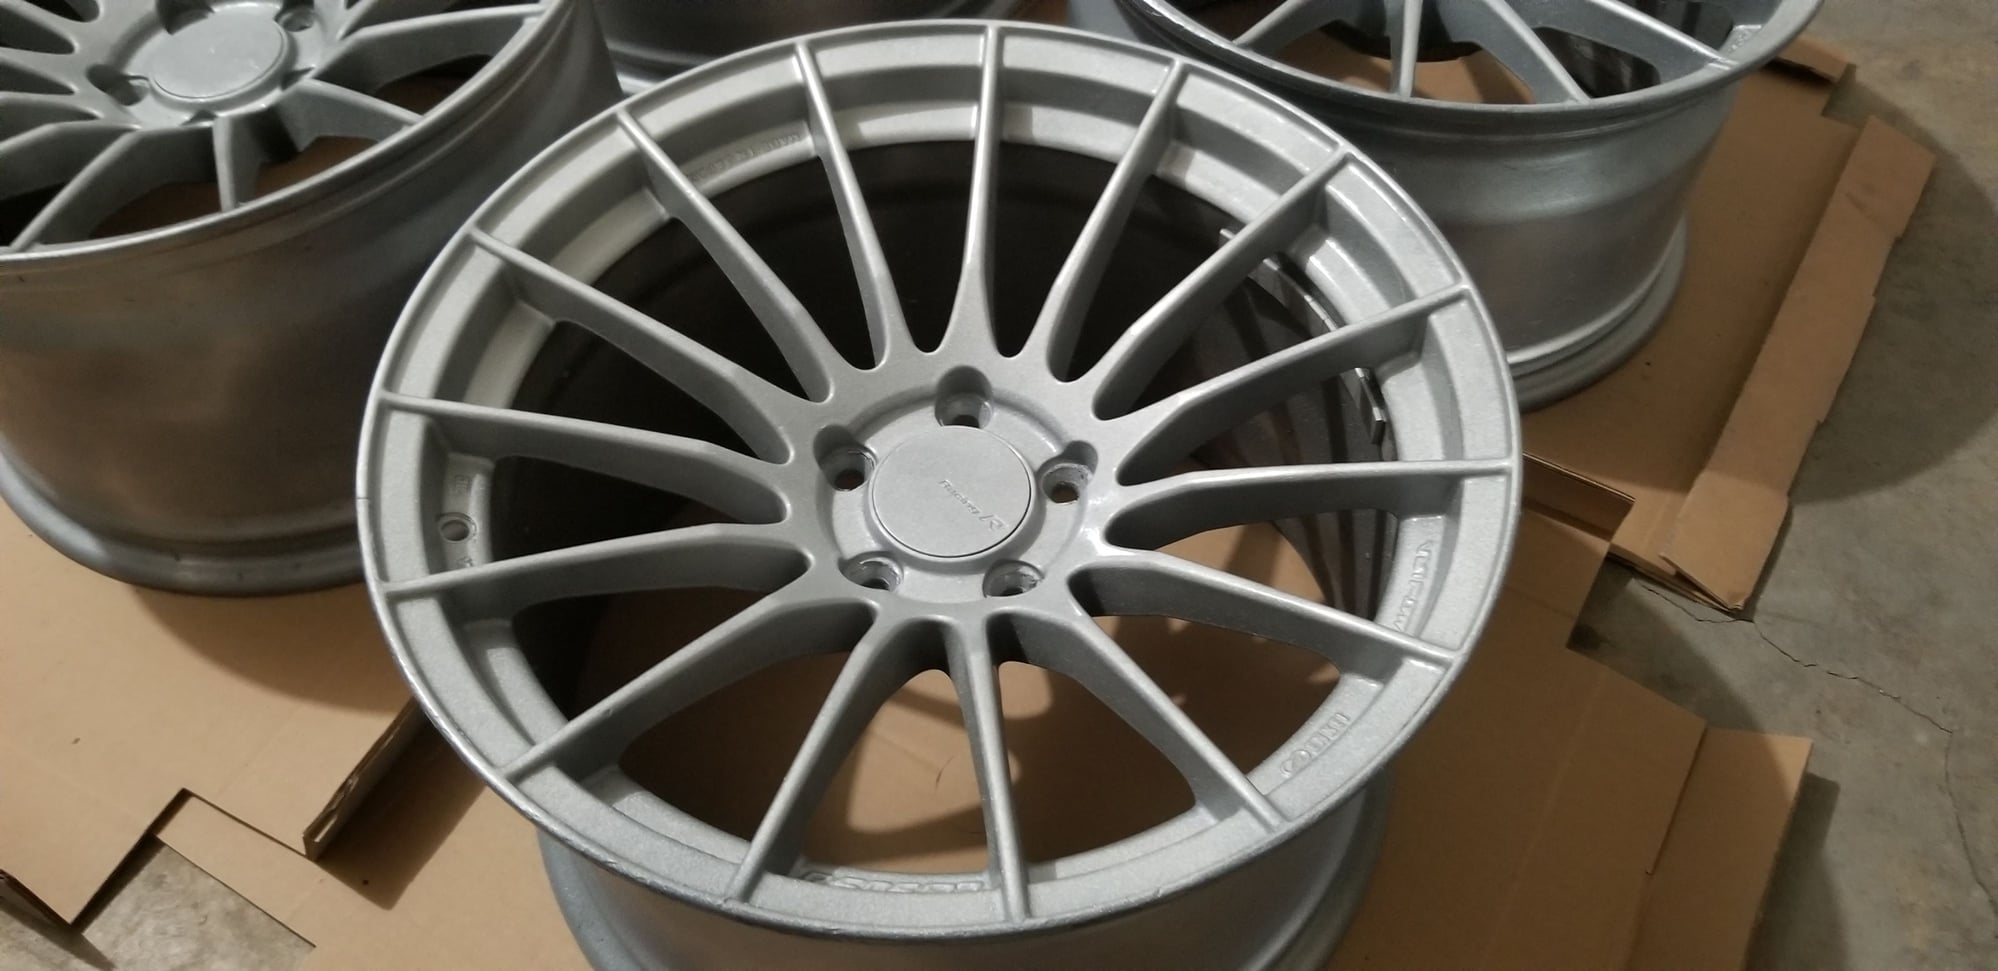 Wheels and Tires/Axles - Enkei rs05rr Wheels for sale - Used - 2006 to 2013 Lexus IS250 - Dublin, OH 43017, United States